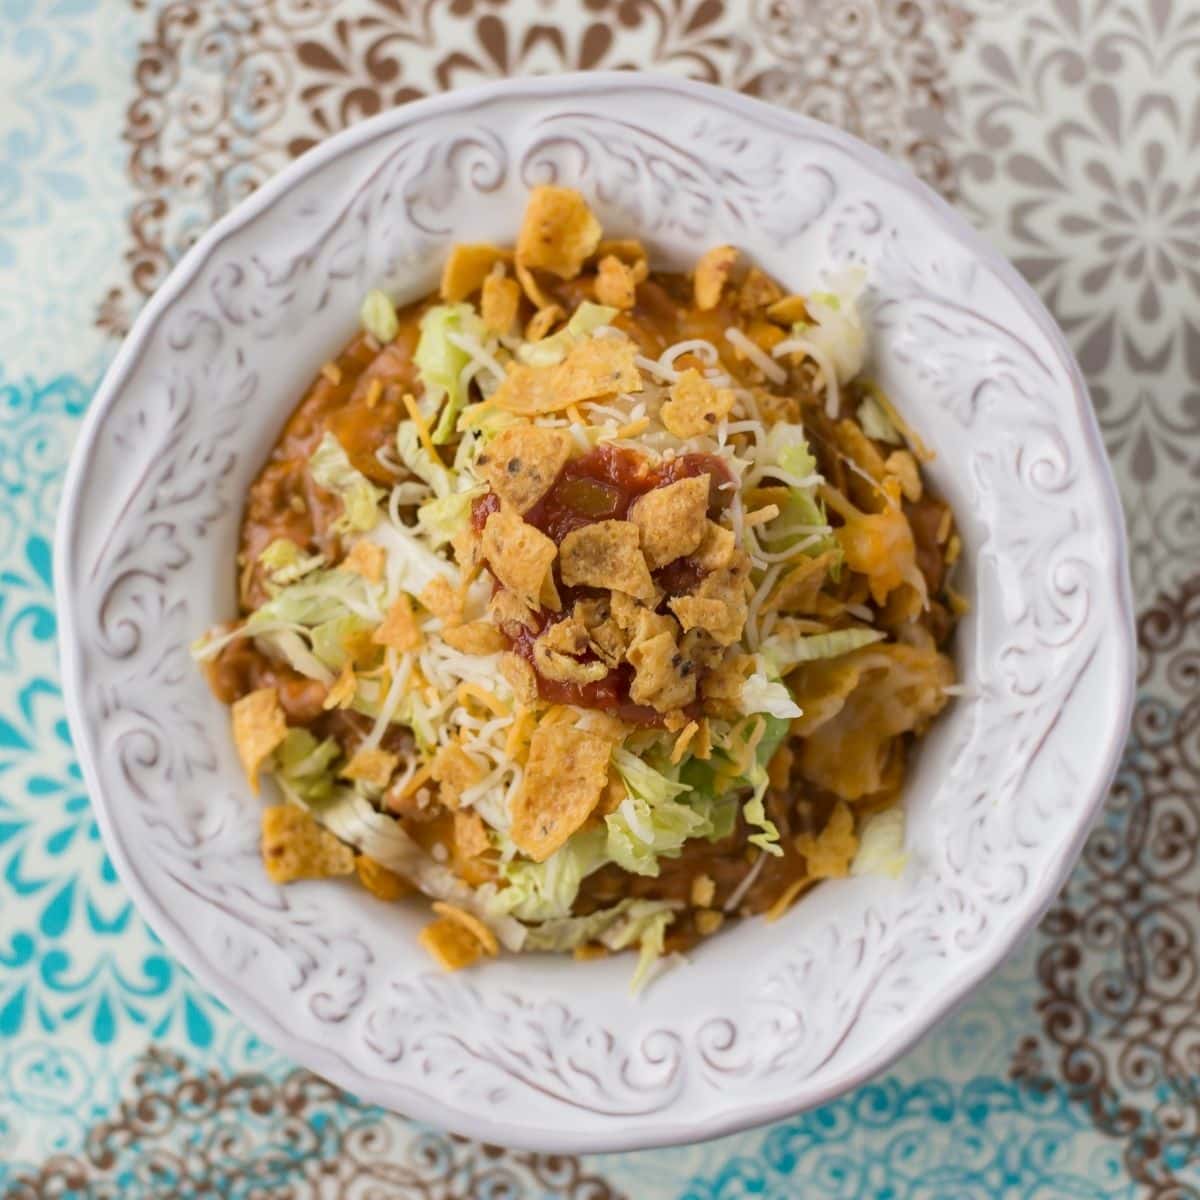 Overhead image of a bowl filled with Frito Taco Casserole topped with lettuce and salsa.